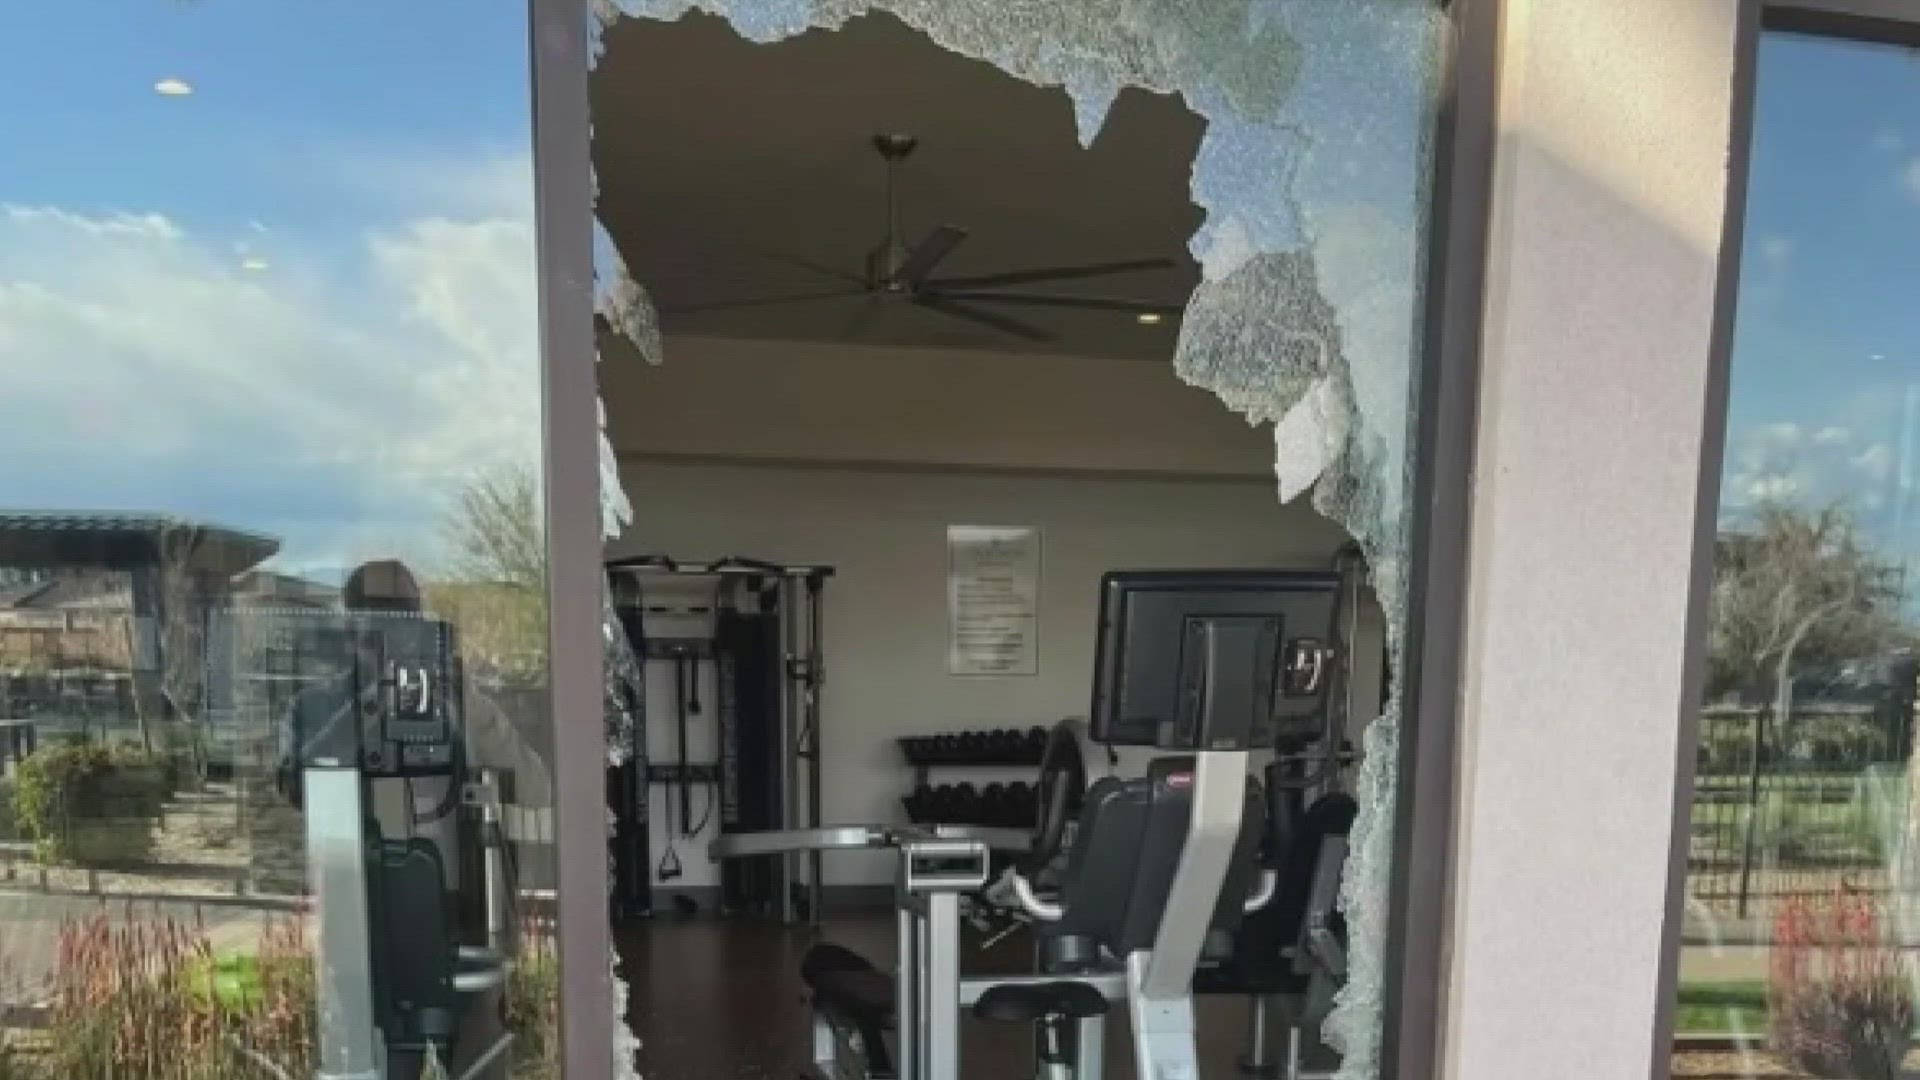 Police responded to several calls on Saturday of damage at the Ovation at Meridan community located near Meridan and Ocotillo roads.